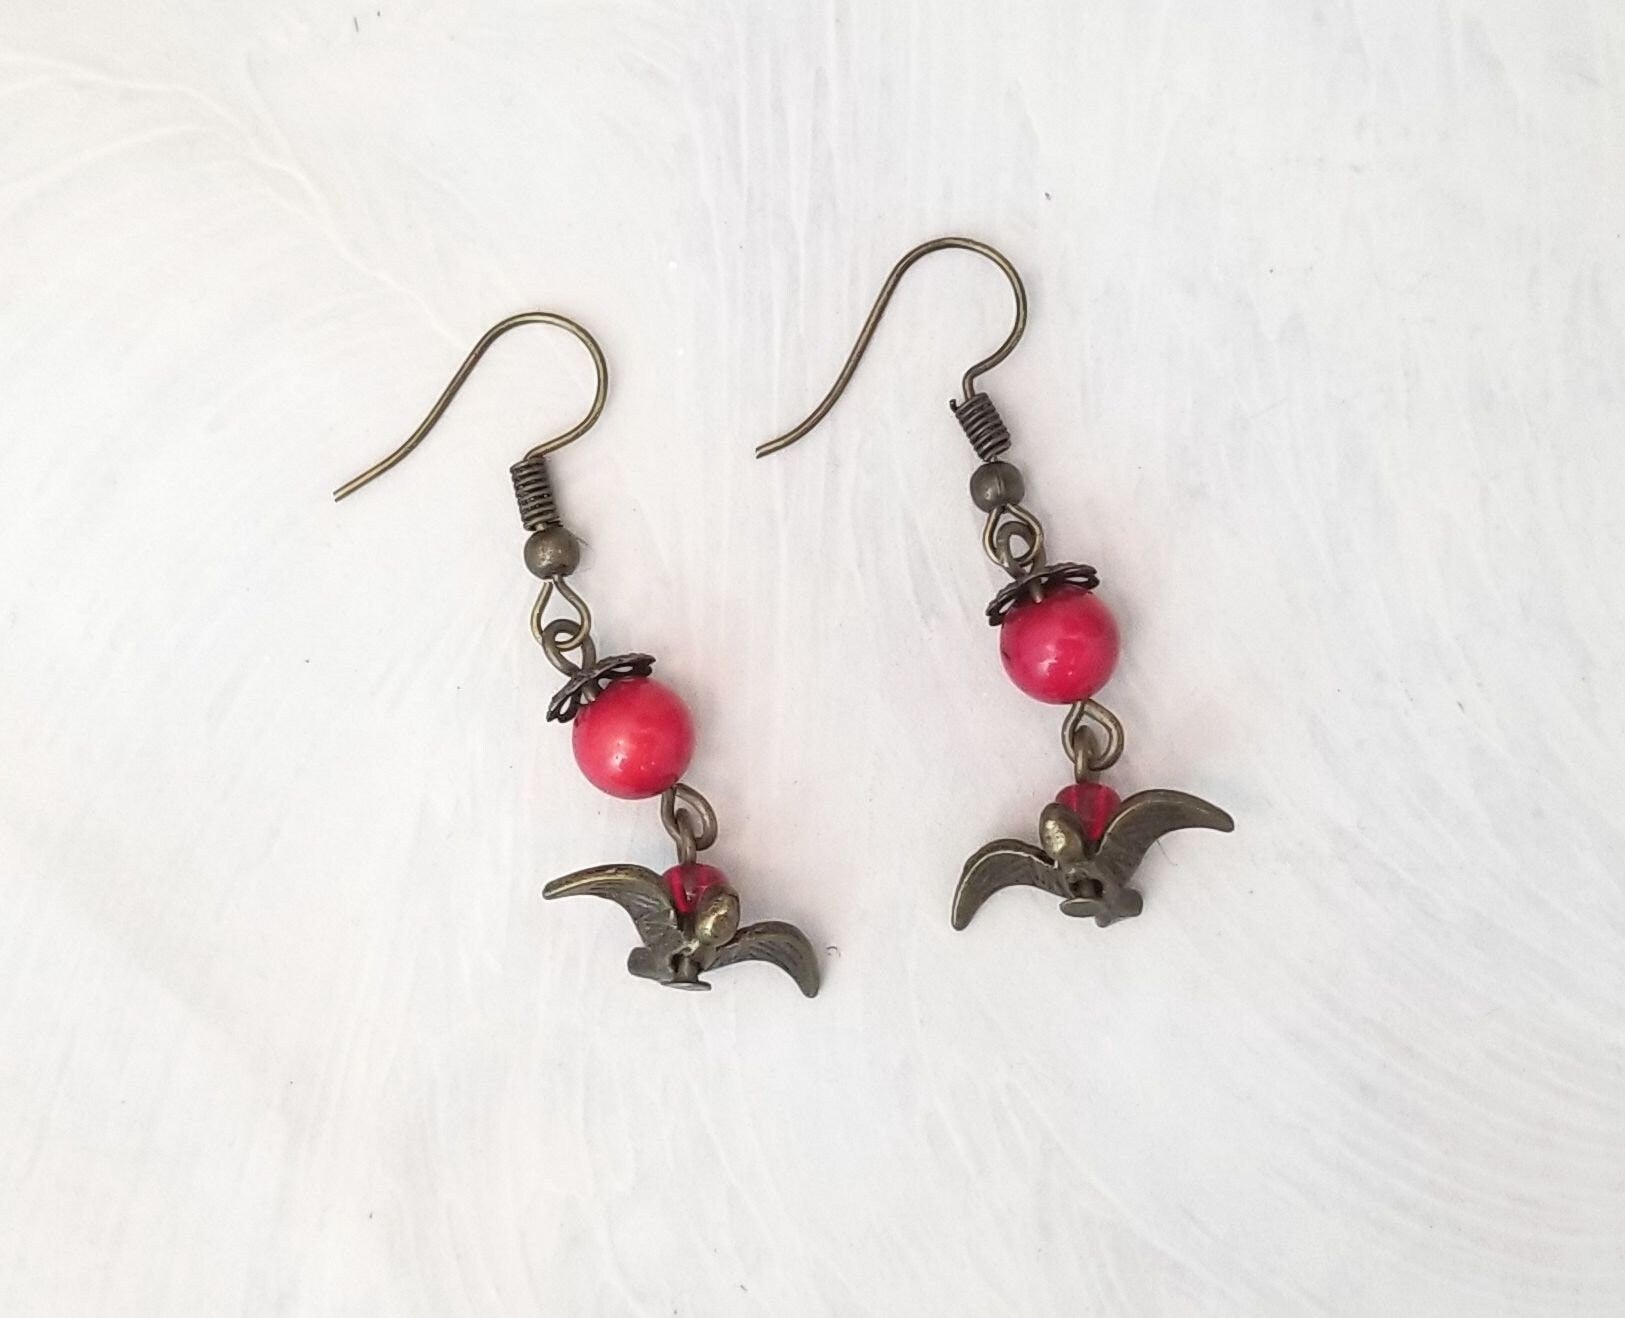 Earrings with Flying Bird Charms, Party, Wedding, Bridesmaid, Art Nouveau, Belle Époque, Renaissance, Garden, Red, More Colors Available